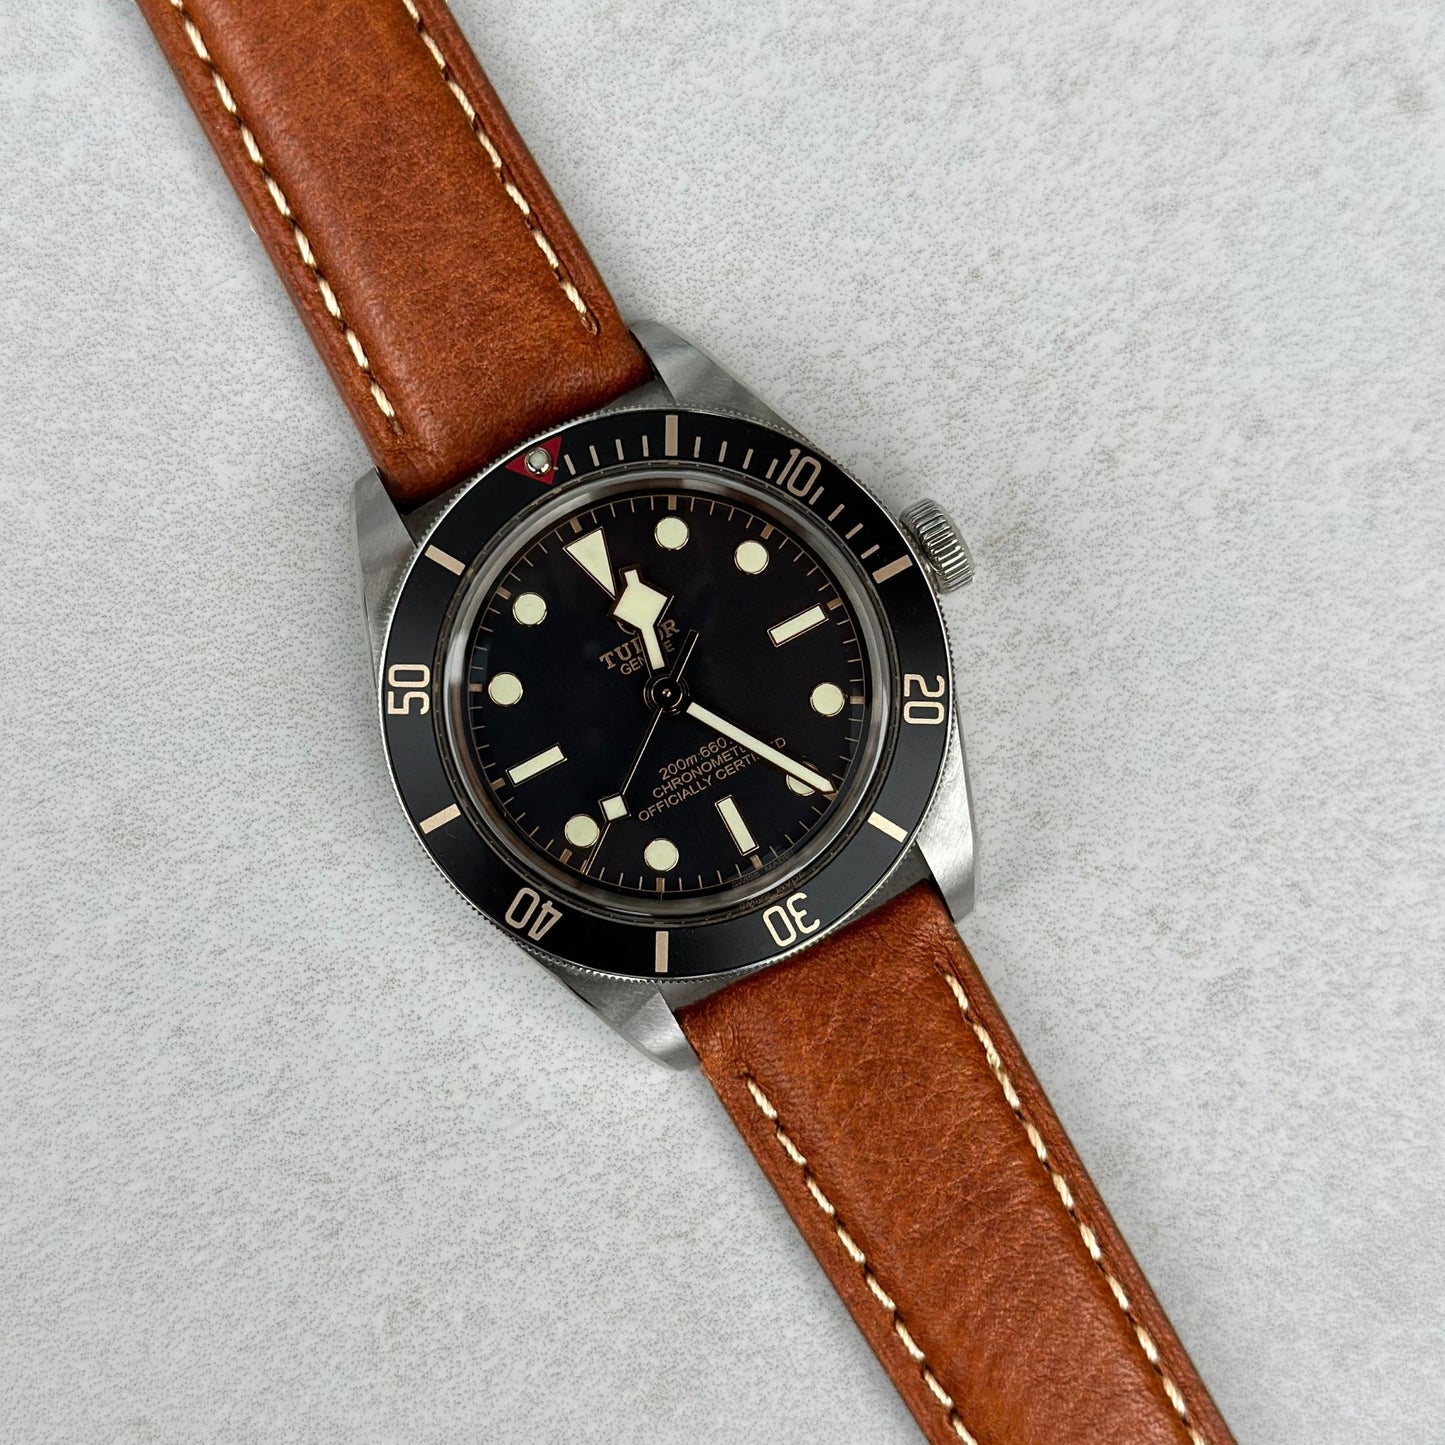 Rome copper tan Italian leather watch strap on the Tudor Blackbay 58. 20mm watch strap. Ivory stitching. Watch And Strap